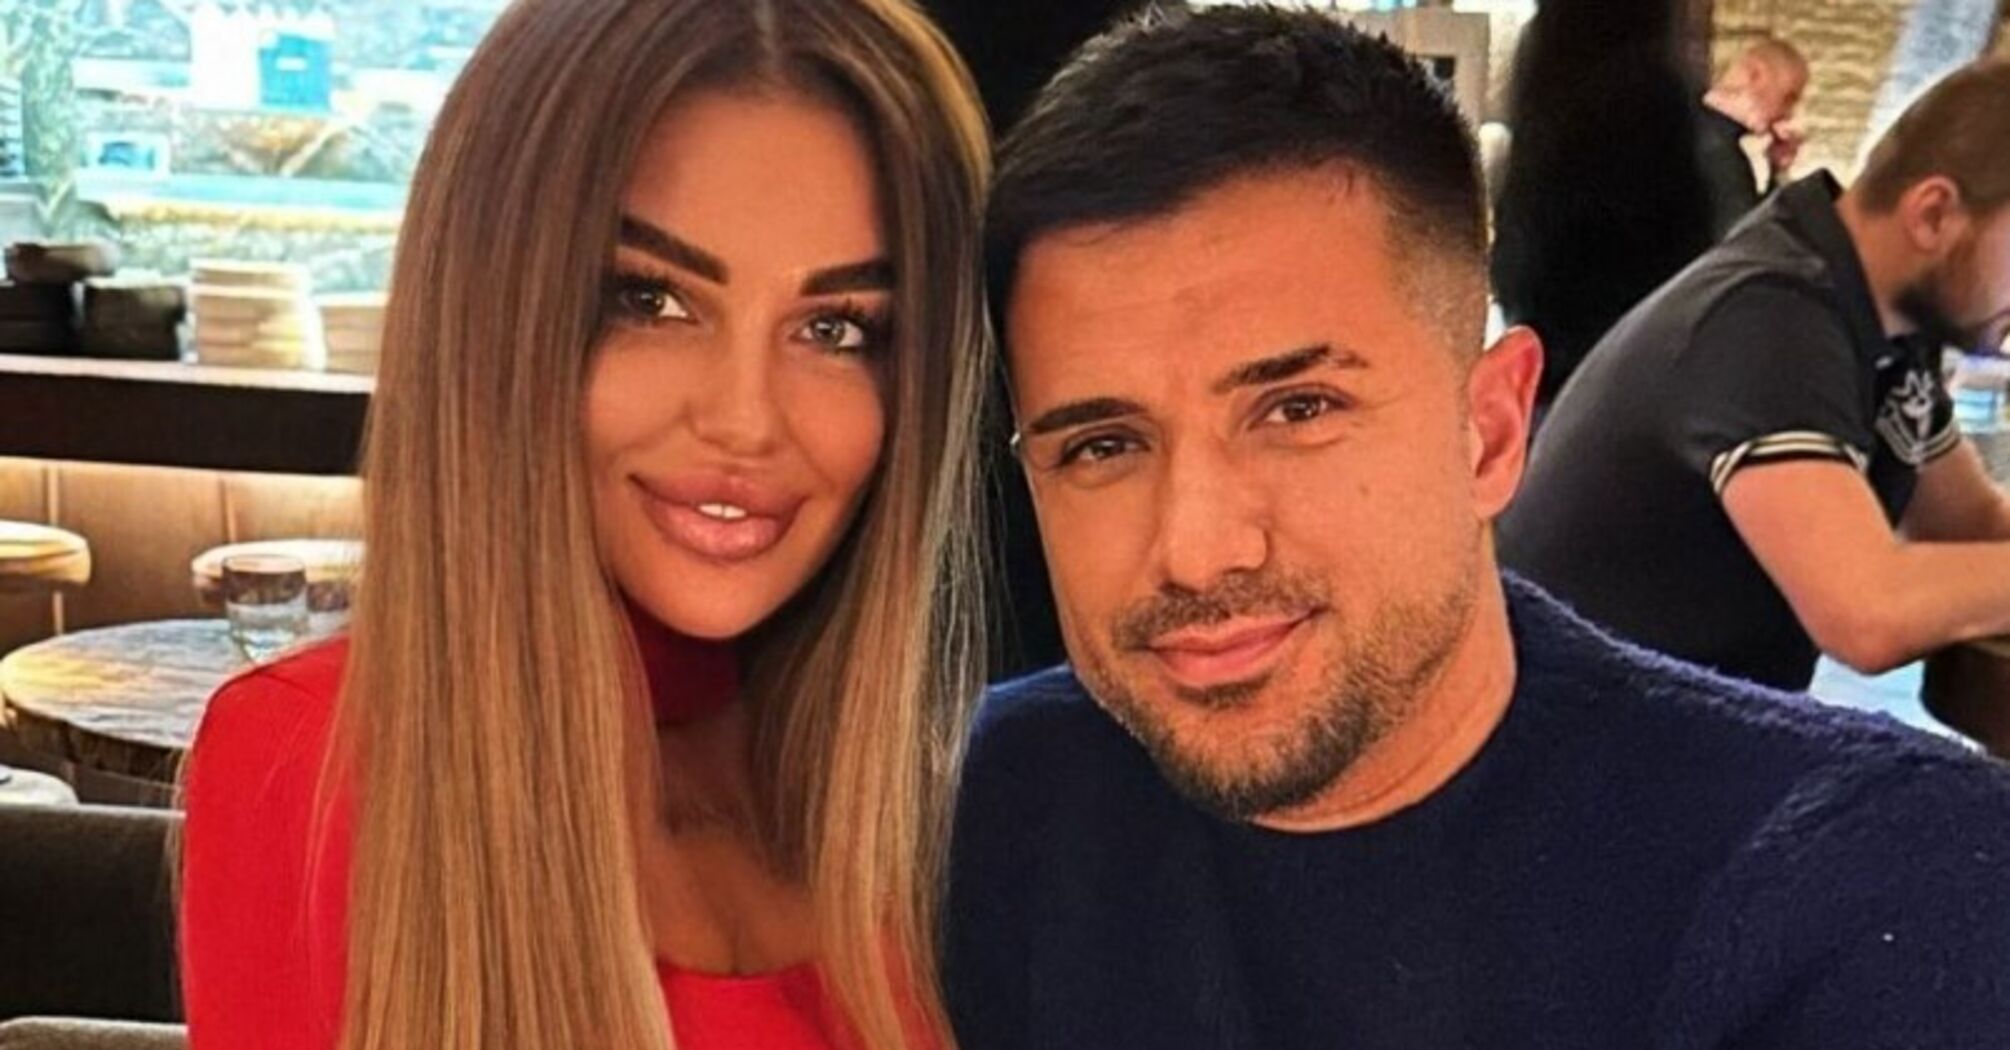 Ani Lorak's ex-husband shows how he and his fiancée are having fun